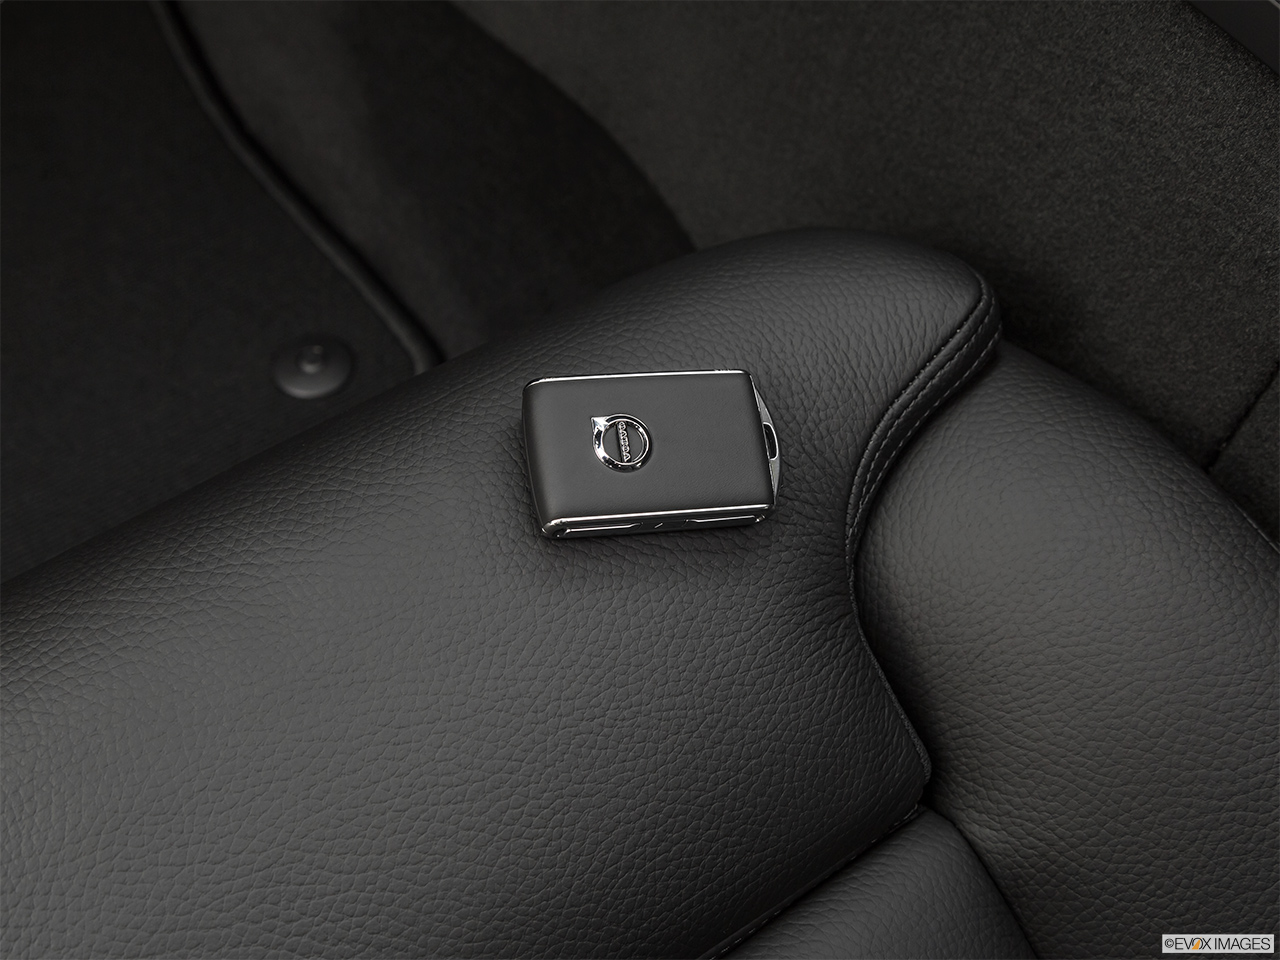 2020 Volvo S60 T5 Inscription Key fob on driver's seat. 